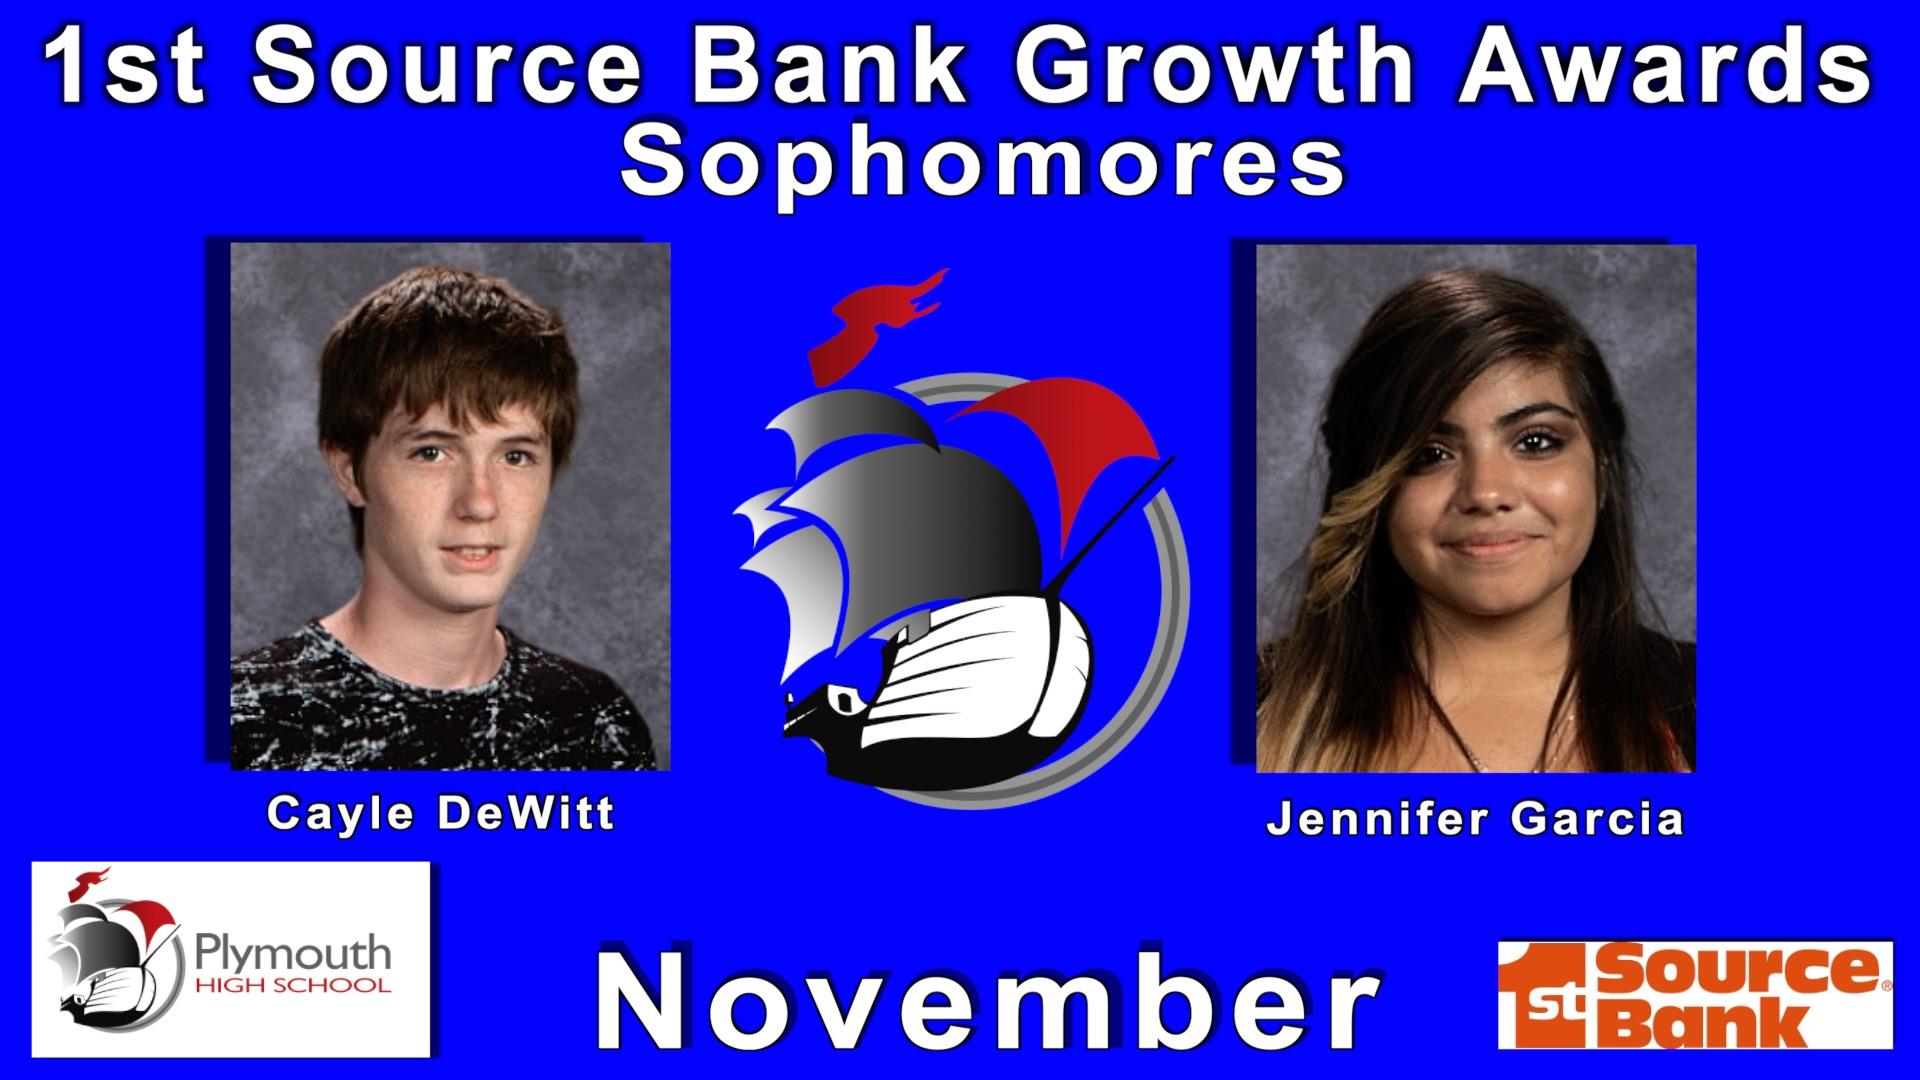 1st Source Bank Growth Awards for November